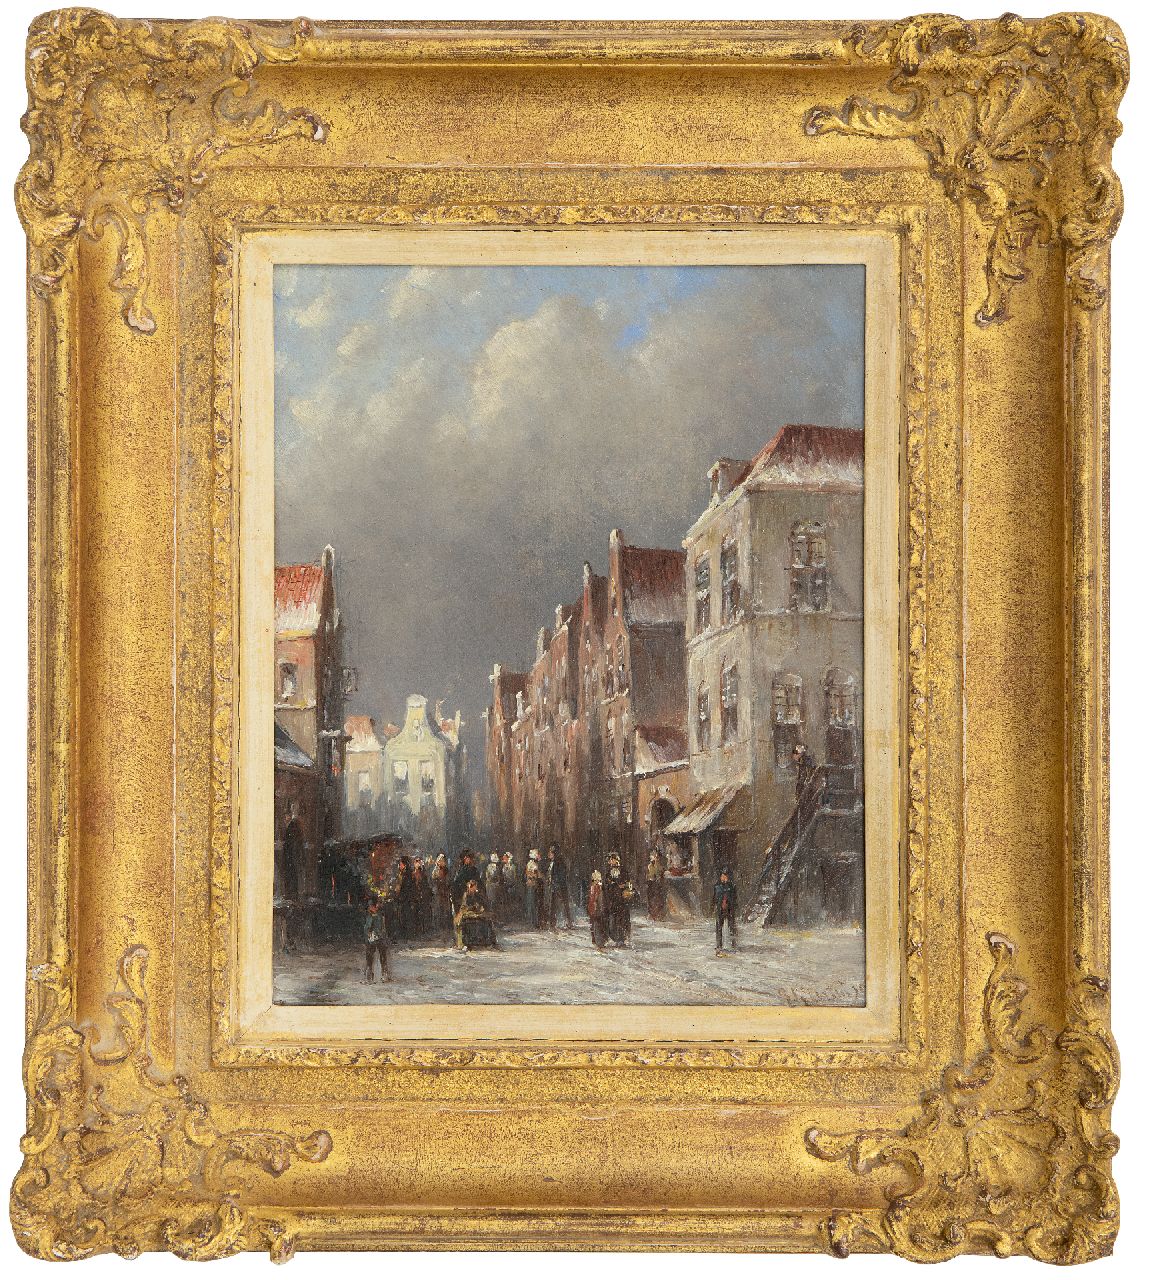 Vertin P.G.  | Petrus Gerardus Vertin | Paintings offered for sale | A busy streetview in winter with figures by a stall, oil on panel 22.1 x 17.7 cm, signed l.r. and dated '92